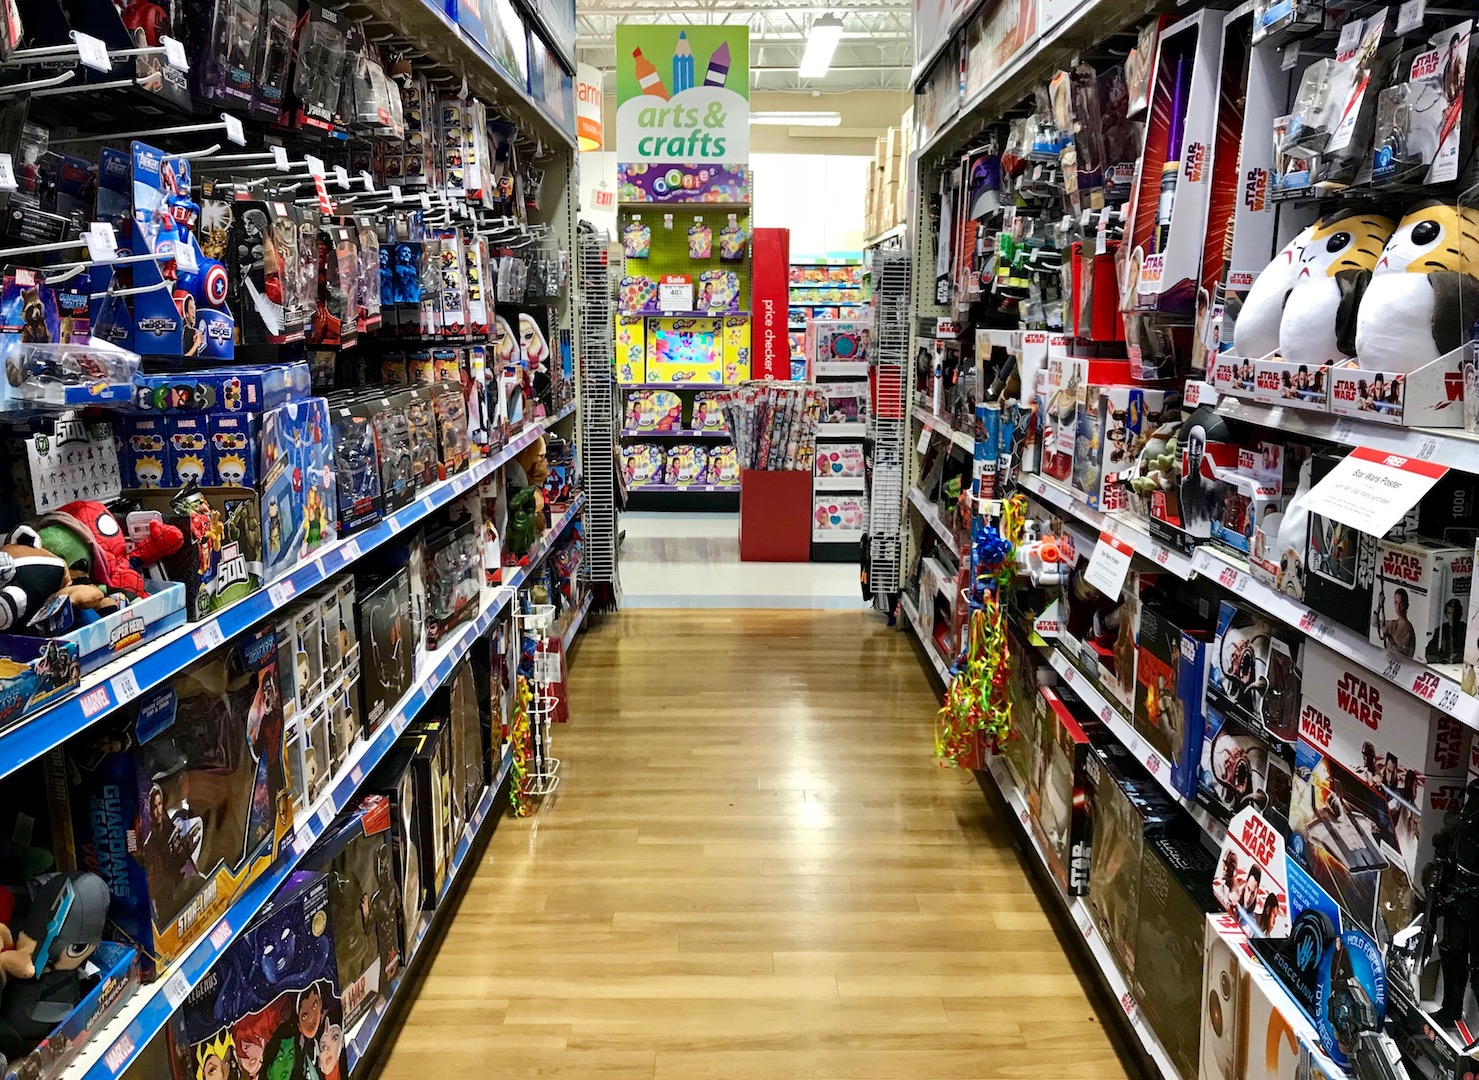 Sorry, millennial consumers, but we need Toys "R" Us